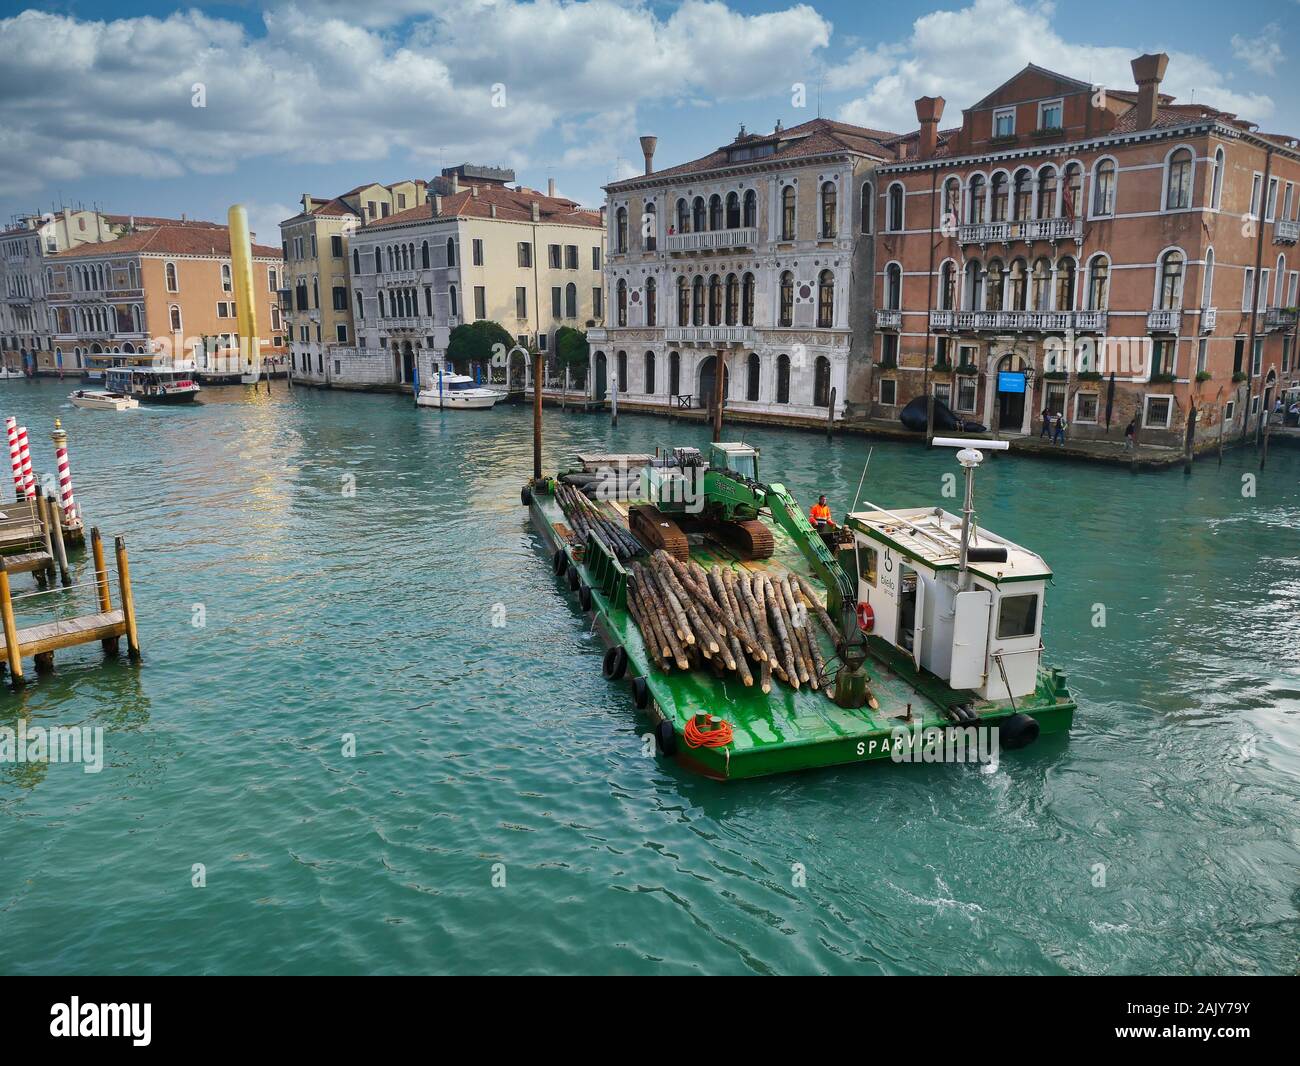 A maintenance barge carrying a supply of wooden pilings moves along a canal in central Venice, Italy on a cloudy day in Autumn. Stock Photo